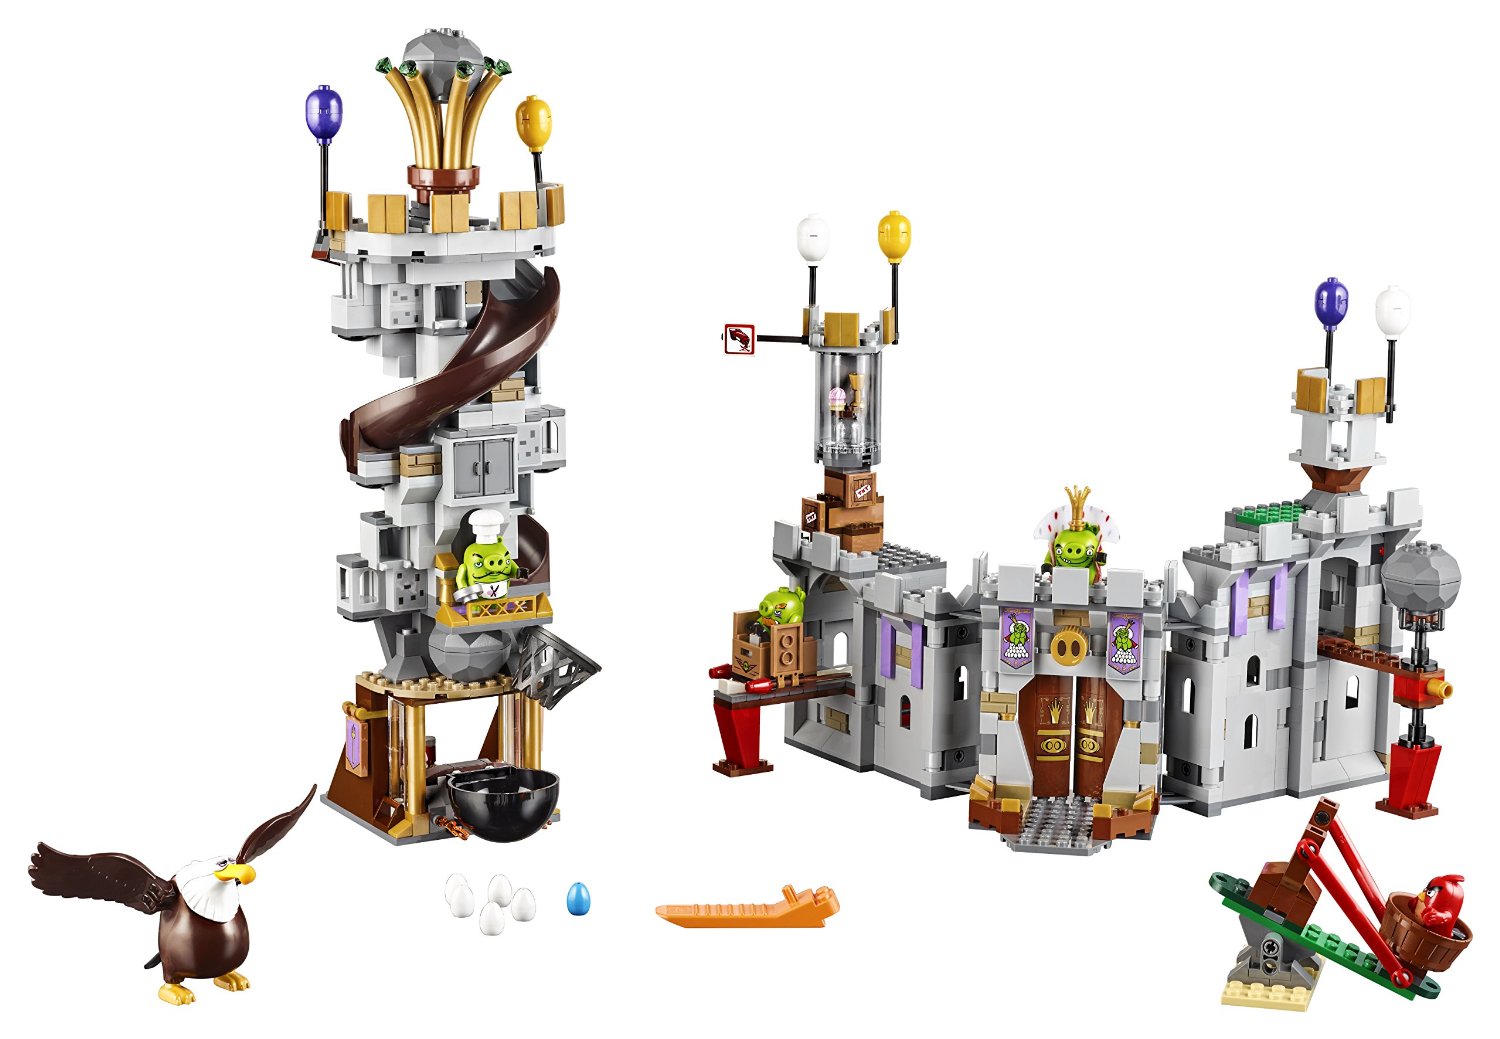 Angry Birds Makes For The Least Exciting LEGO Sets Ever